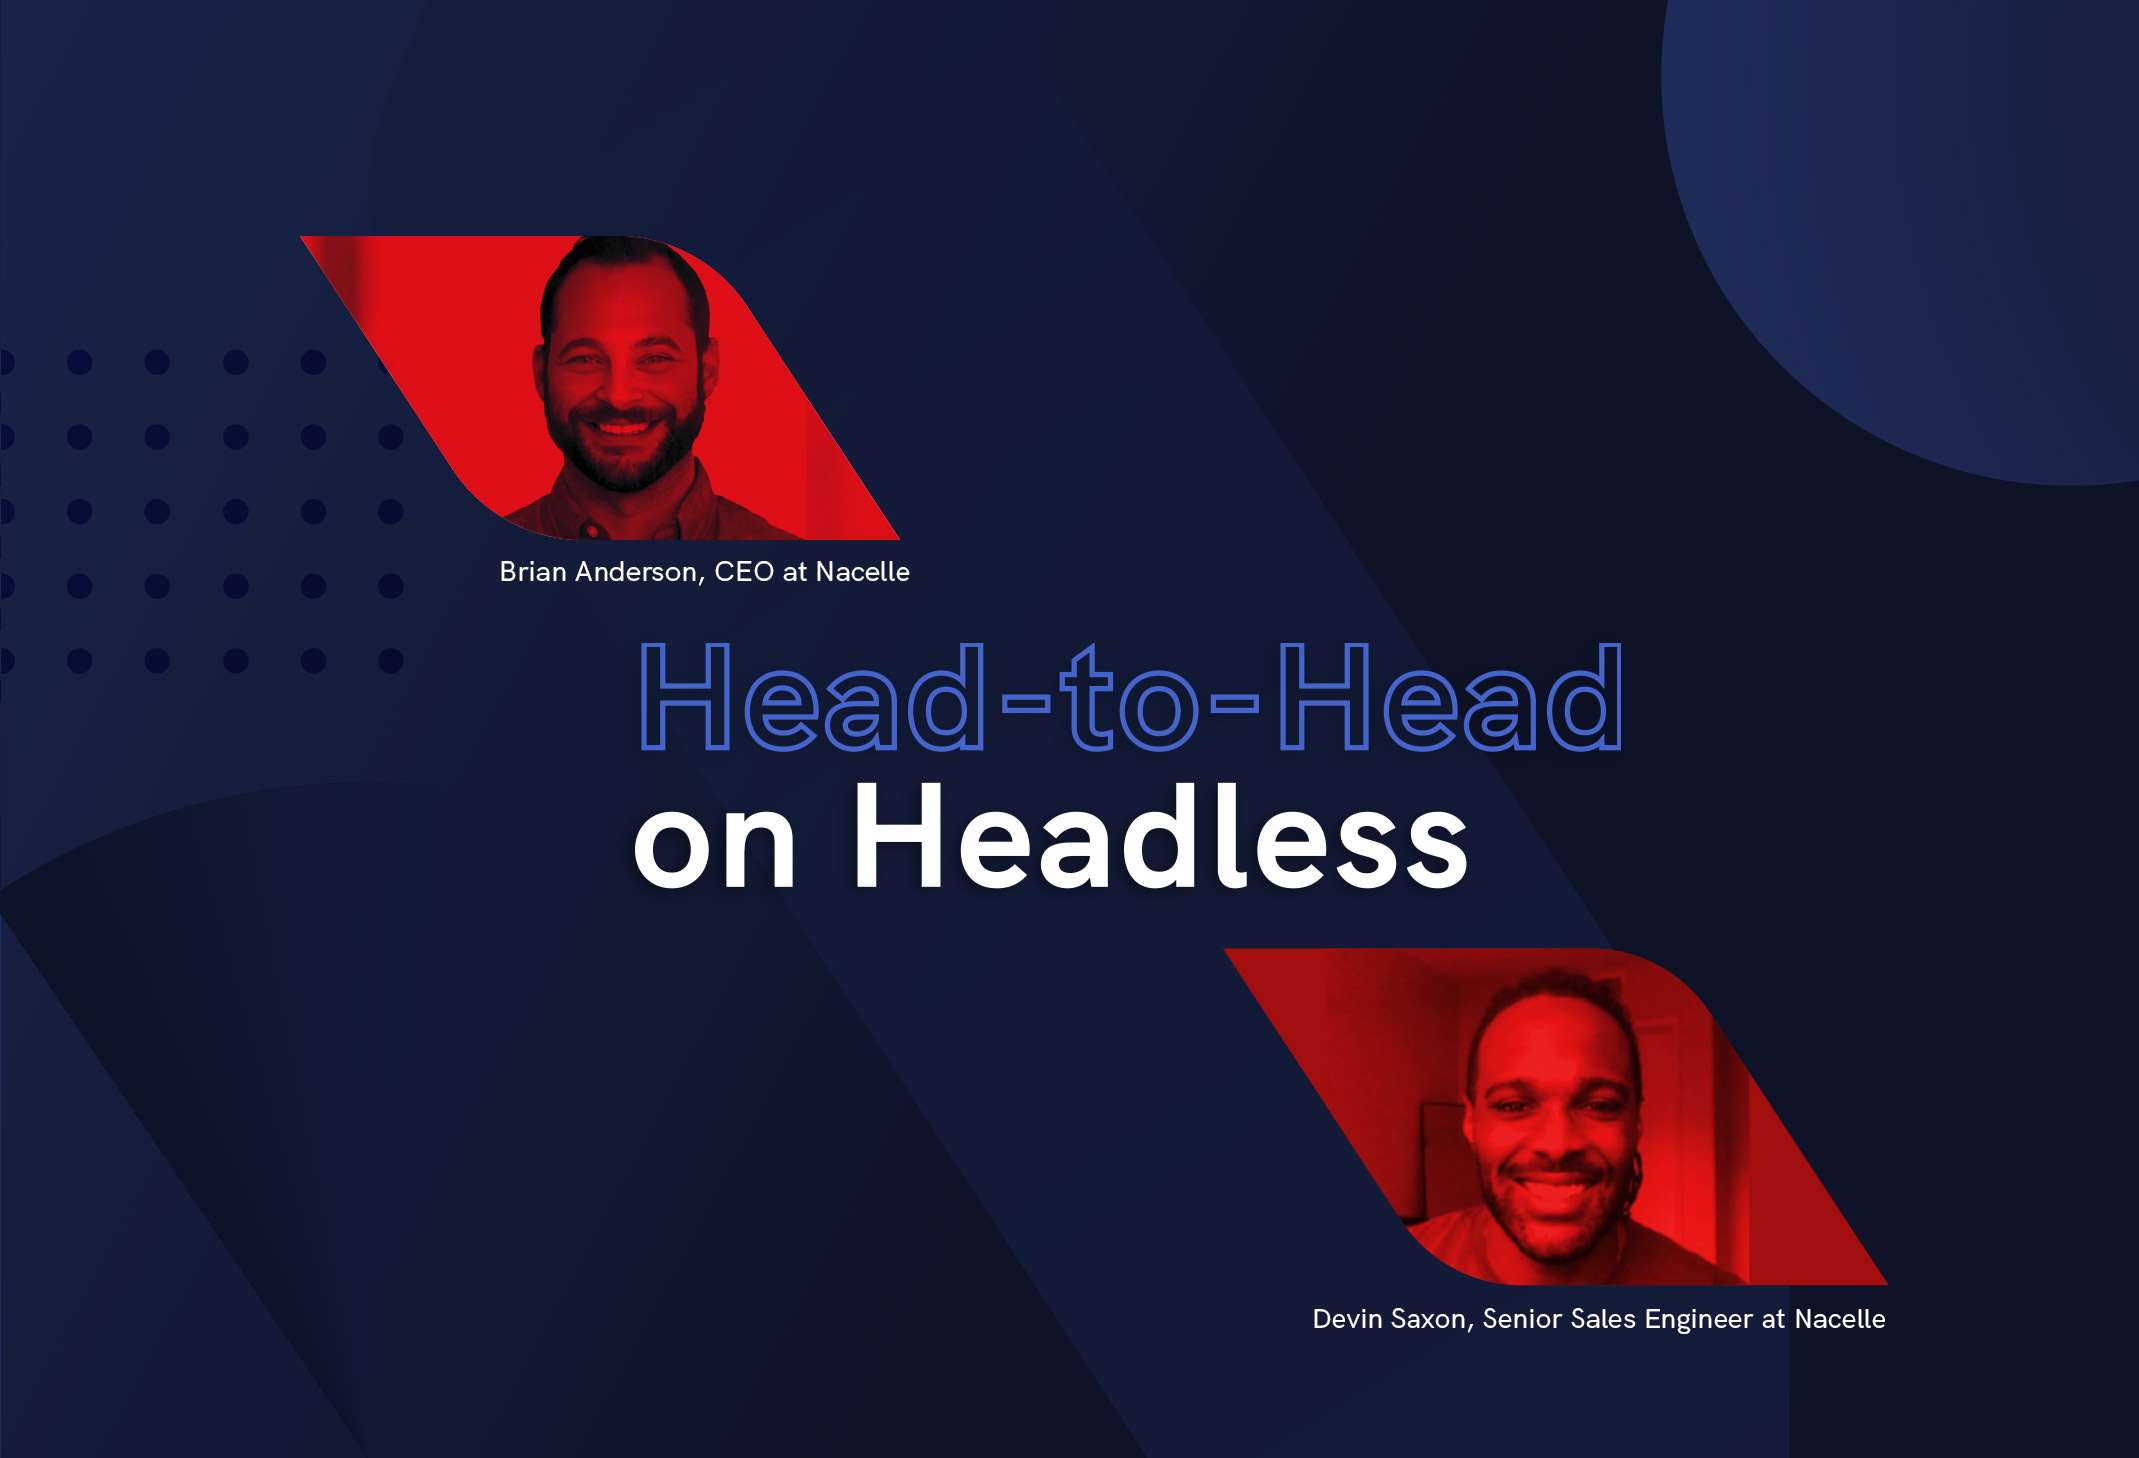  Highlights from head-to-head on headless with Devin Saxon 